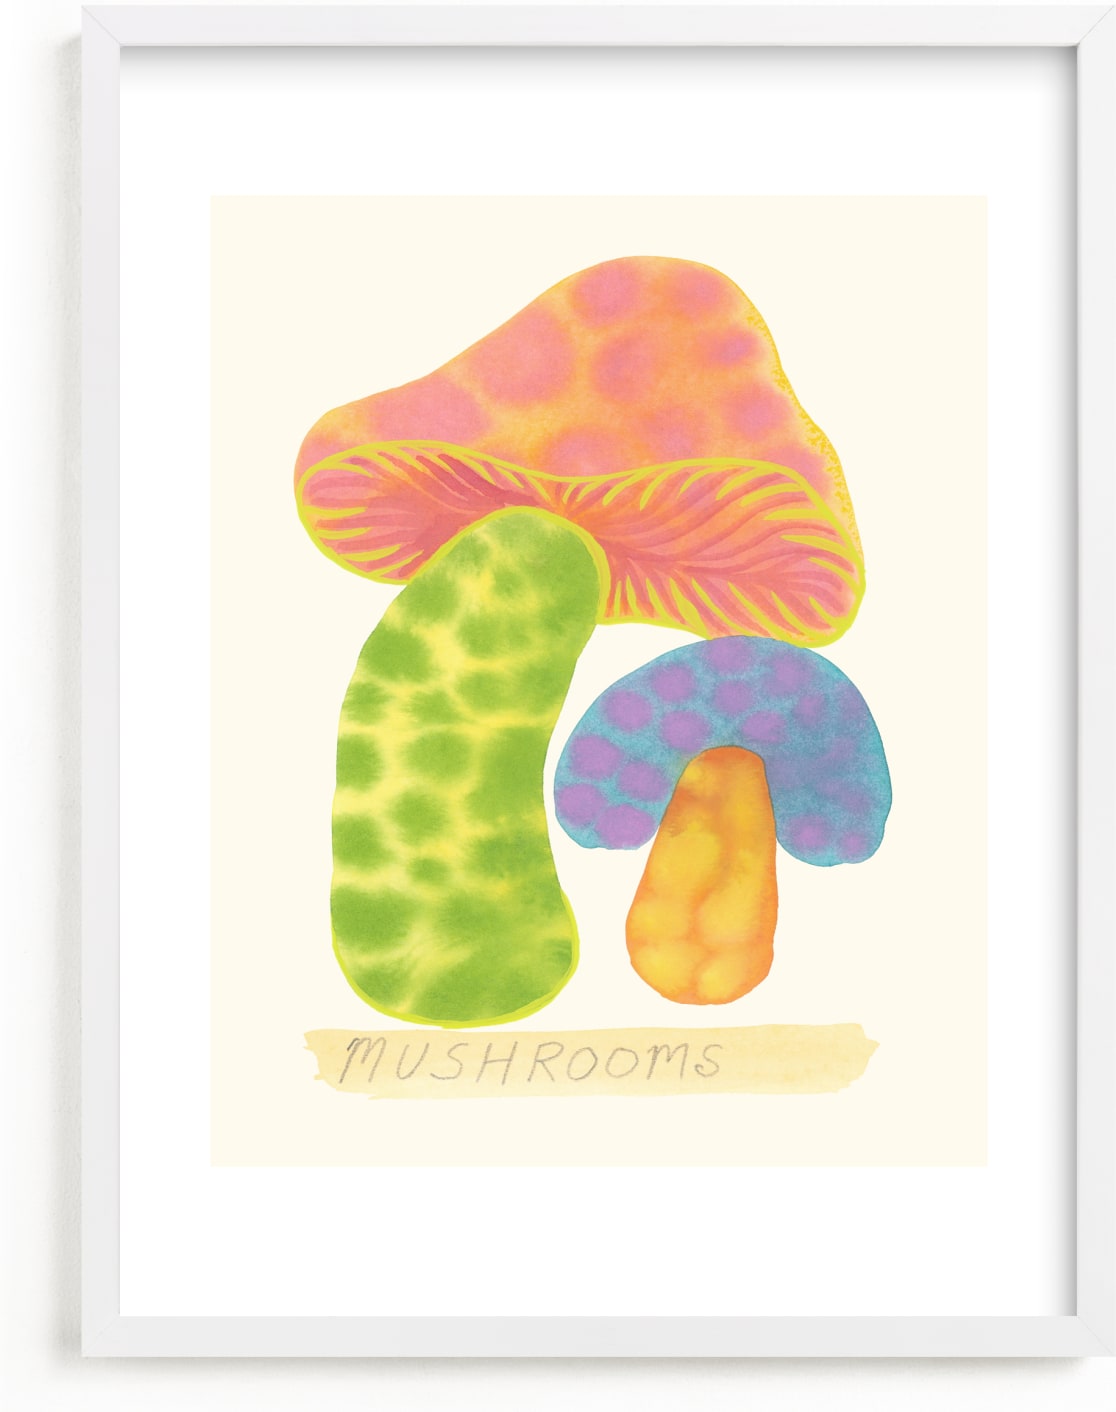 This is a colorful kids wall art by Renée Stramel called mushrooms.